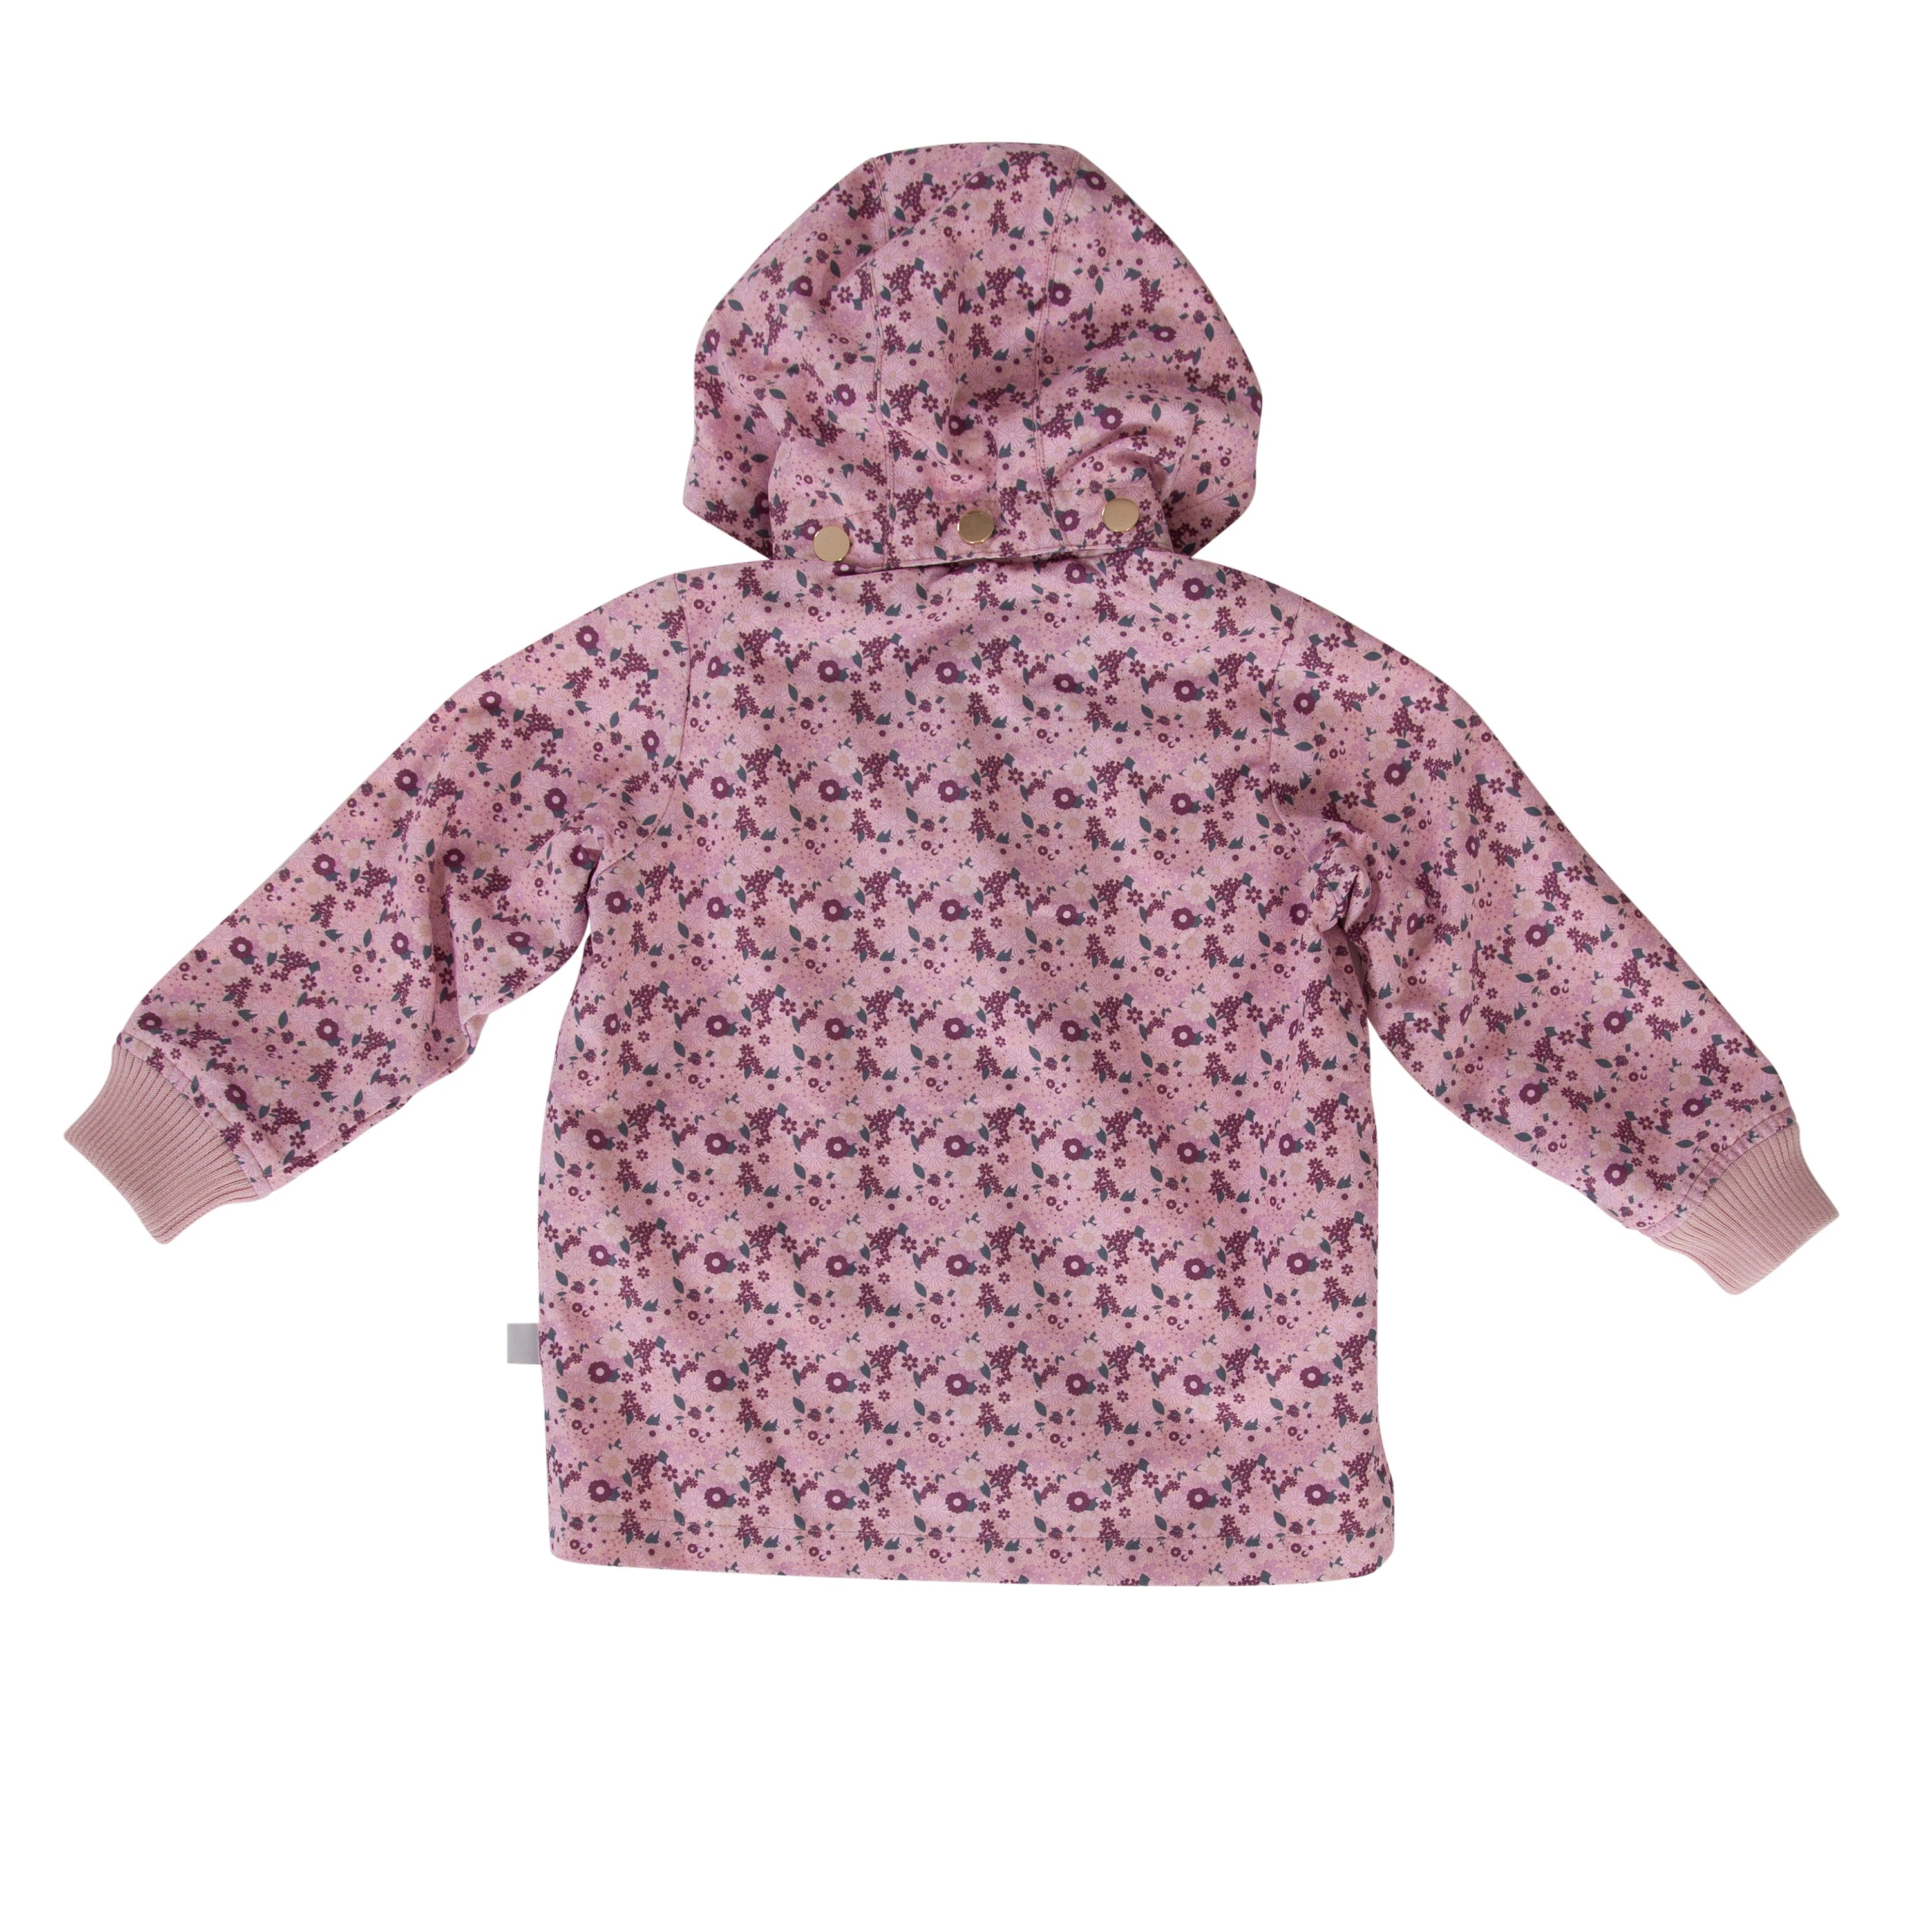 Peggy - Ariana Raincoat Rose Ditzy - Floral